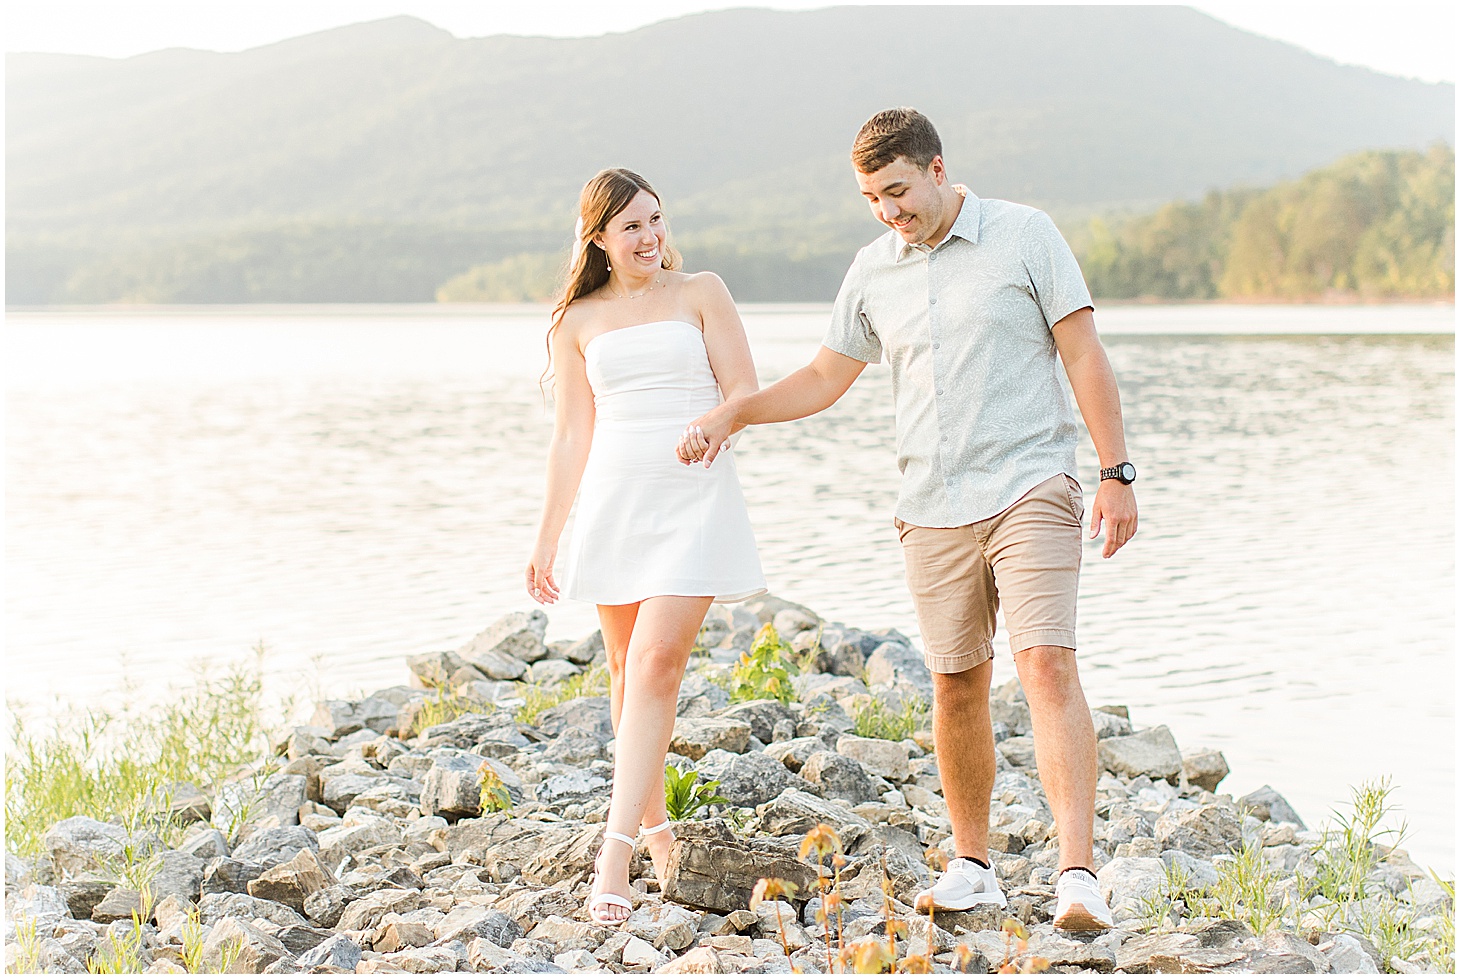 carvinscove_roanokeengagementsession_virginiaweddingphotographer_vaweddingphotographer_photo_0110.jpg